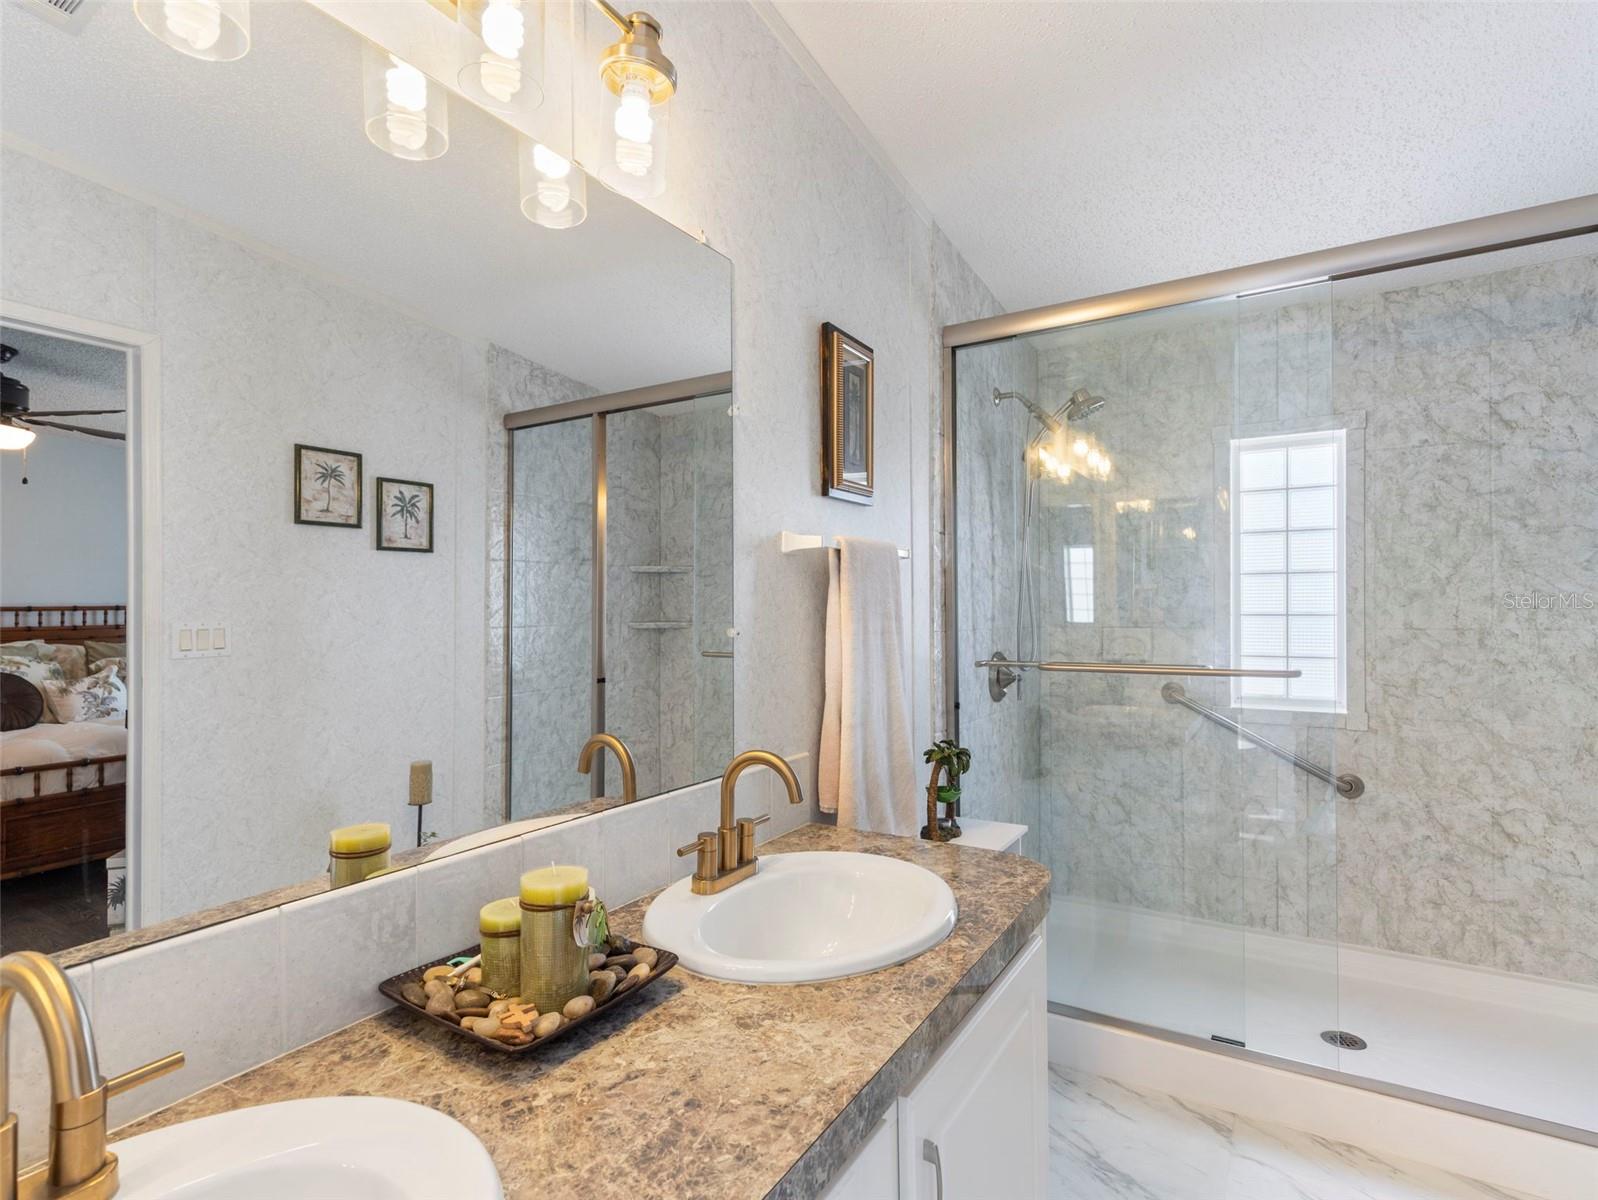 Bath ensuite with Stunning shower with grab bar, upgraded faucets and sleek floors